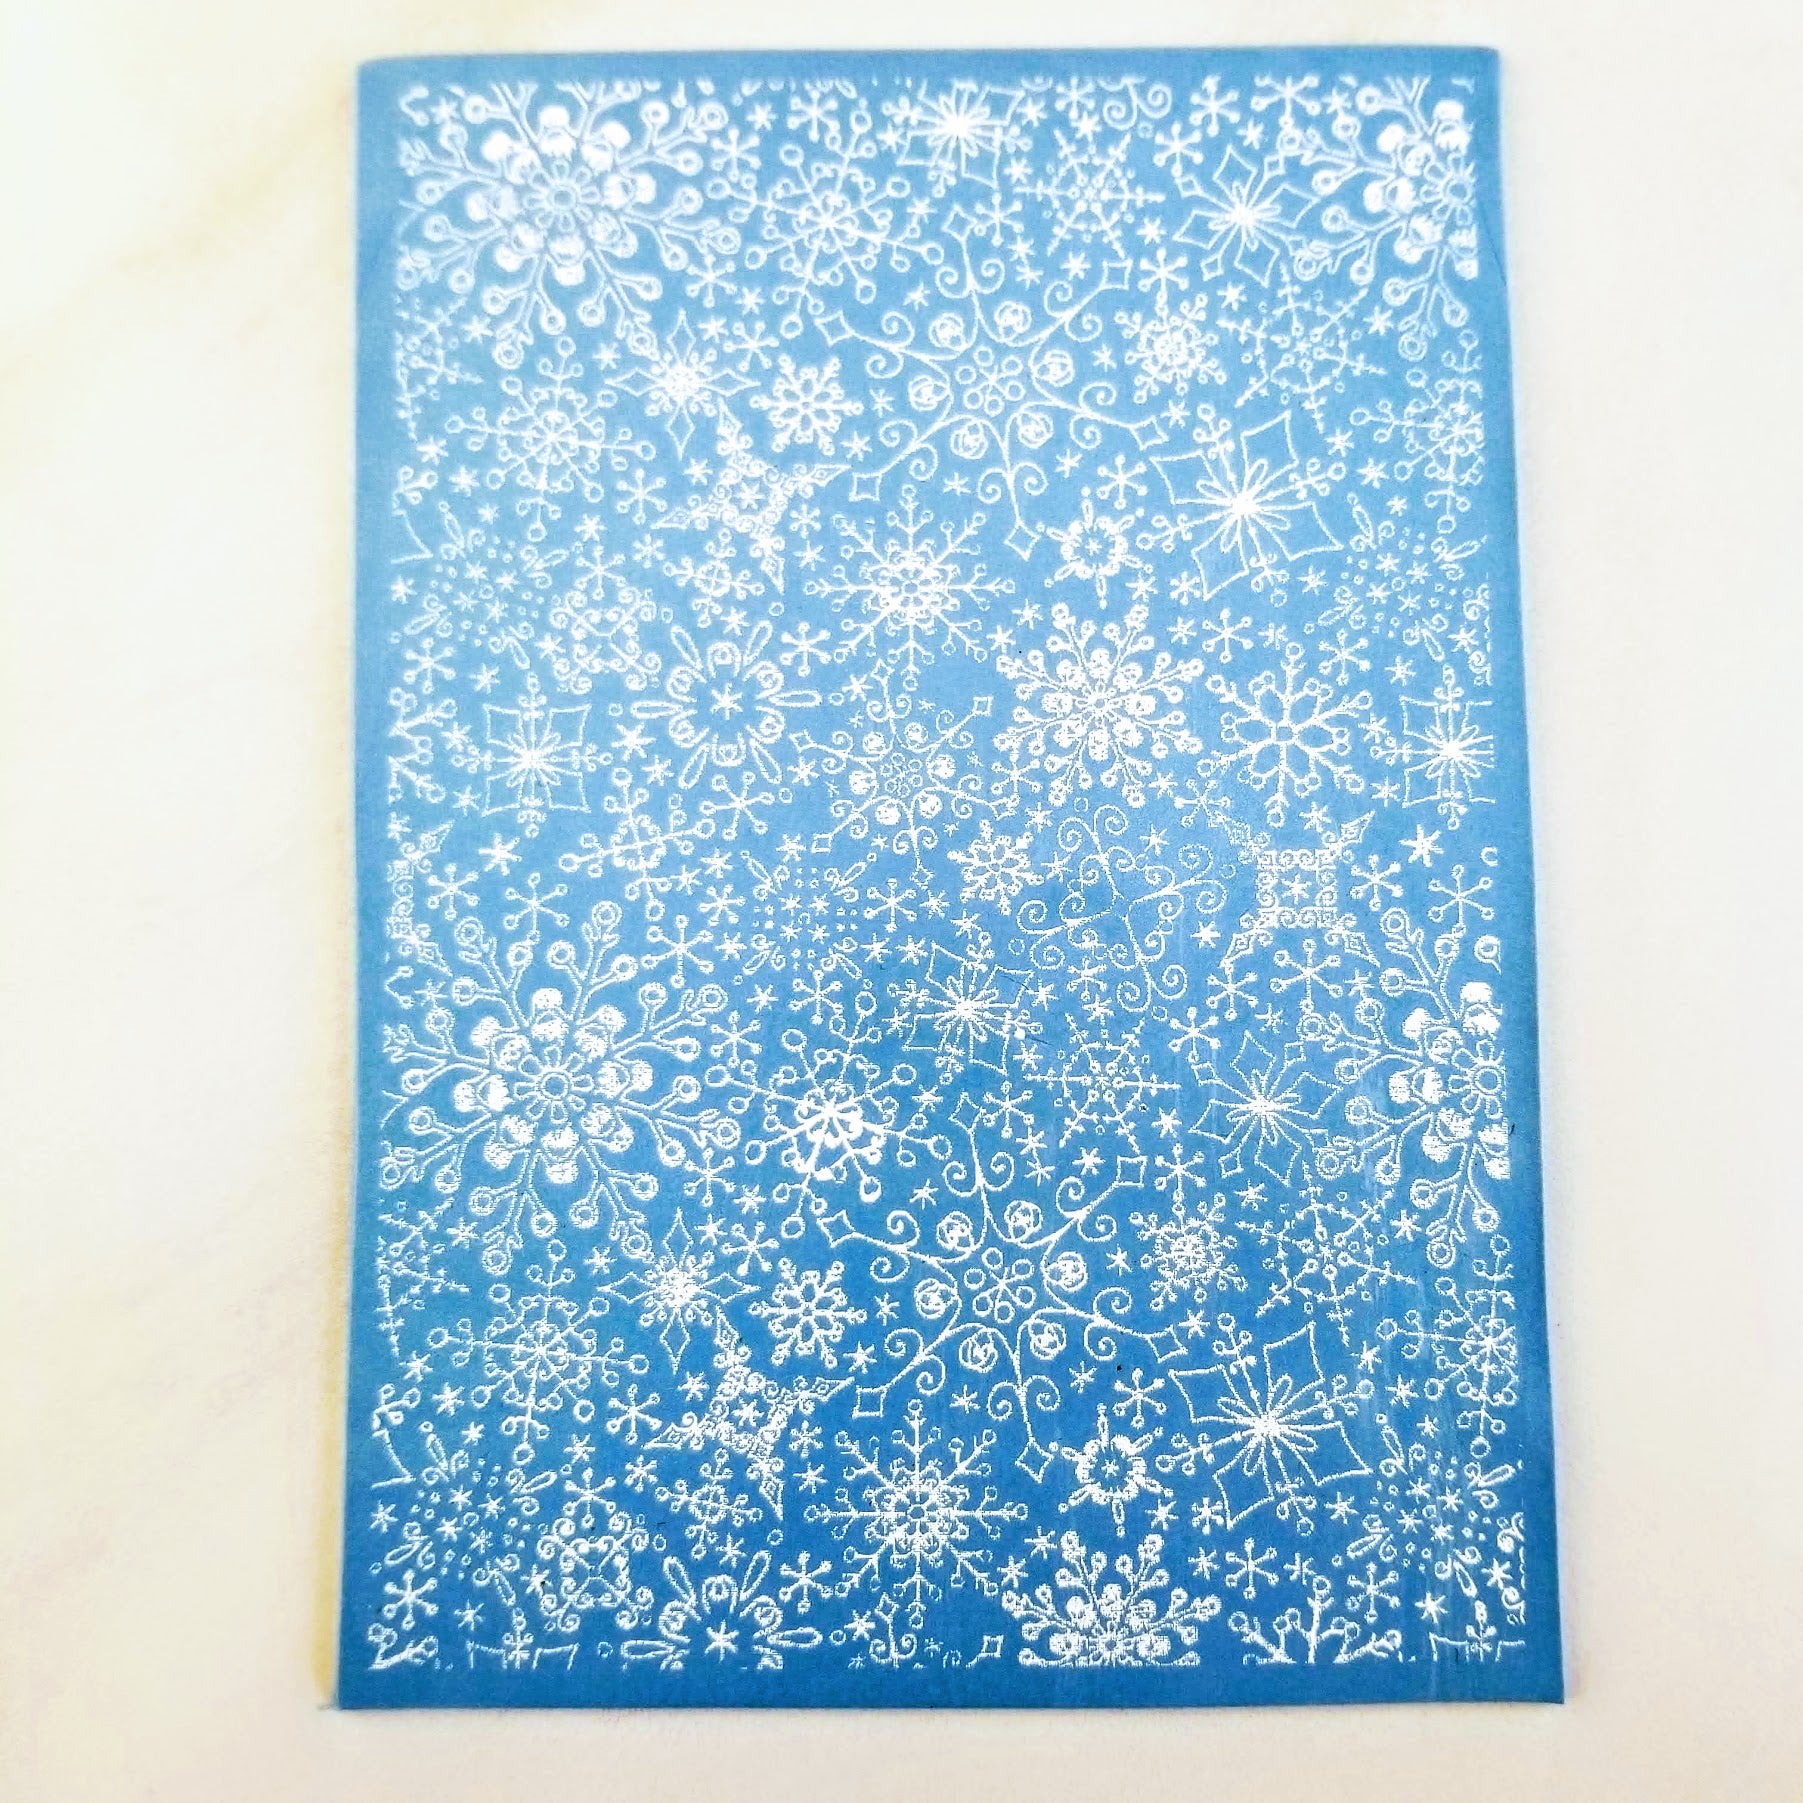 Winter Christmas Frozen Snowflake Clay Painting Silkscreen Stencil for Polymer Clay Crafts